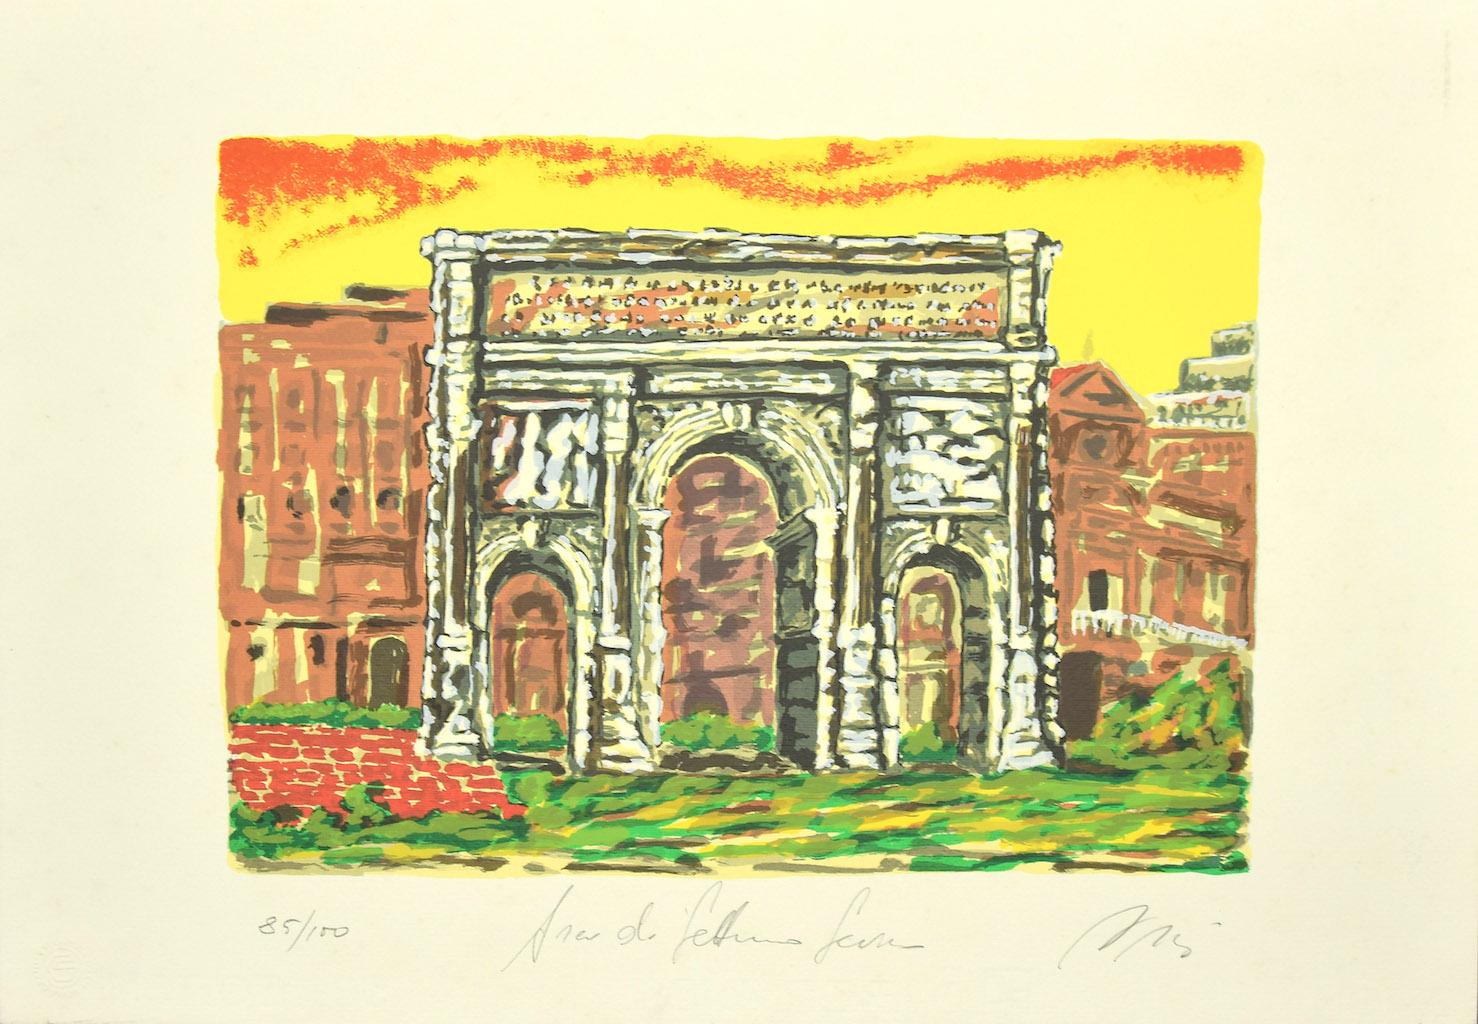 Roman Arch (Arch of Settimo Severo) is an original screen print on paper realized by Italian artist Marco Orsi (1926 - 1999).

Hand-signed on the lower right in pencil, numbered on the lower left, edition of 85/100 prints.

Titled on the lower